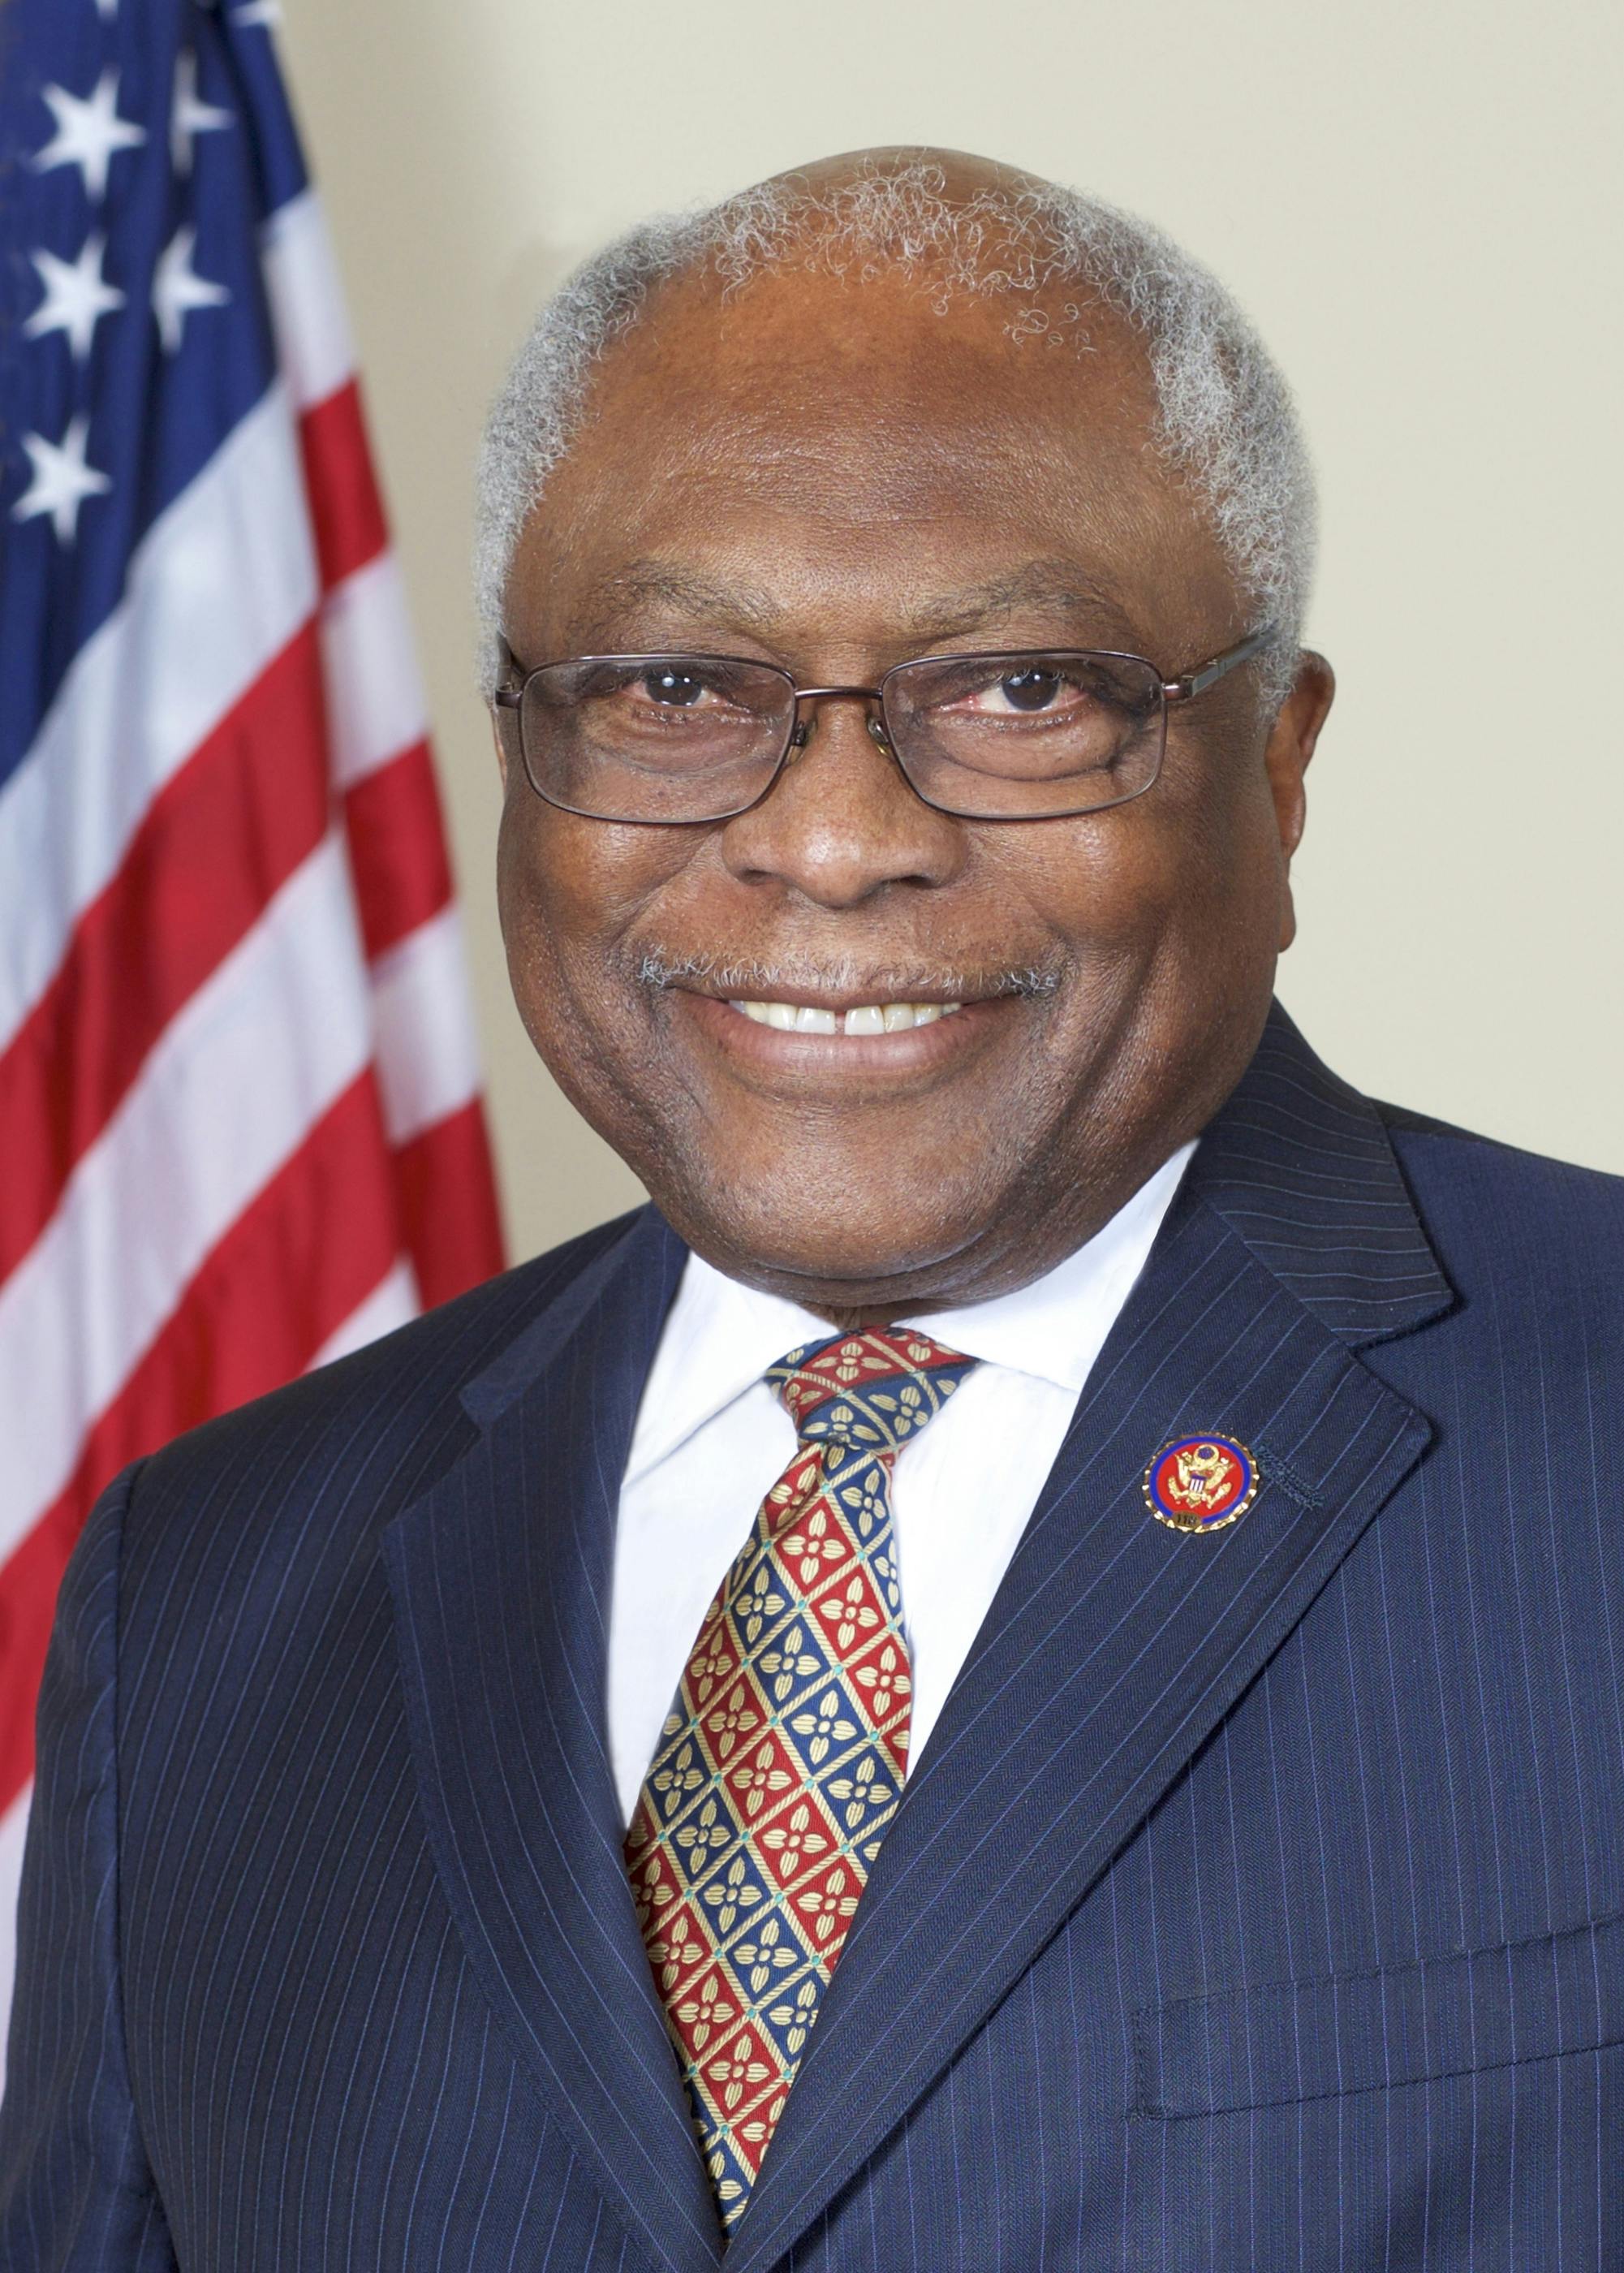 Profile picture of Jim Clyburn